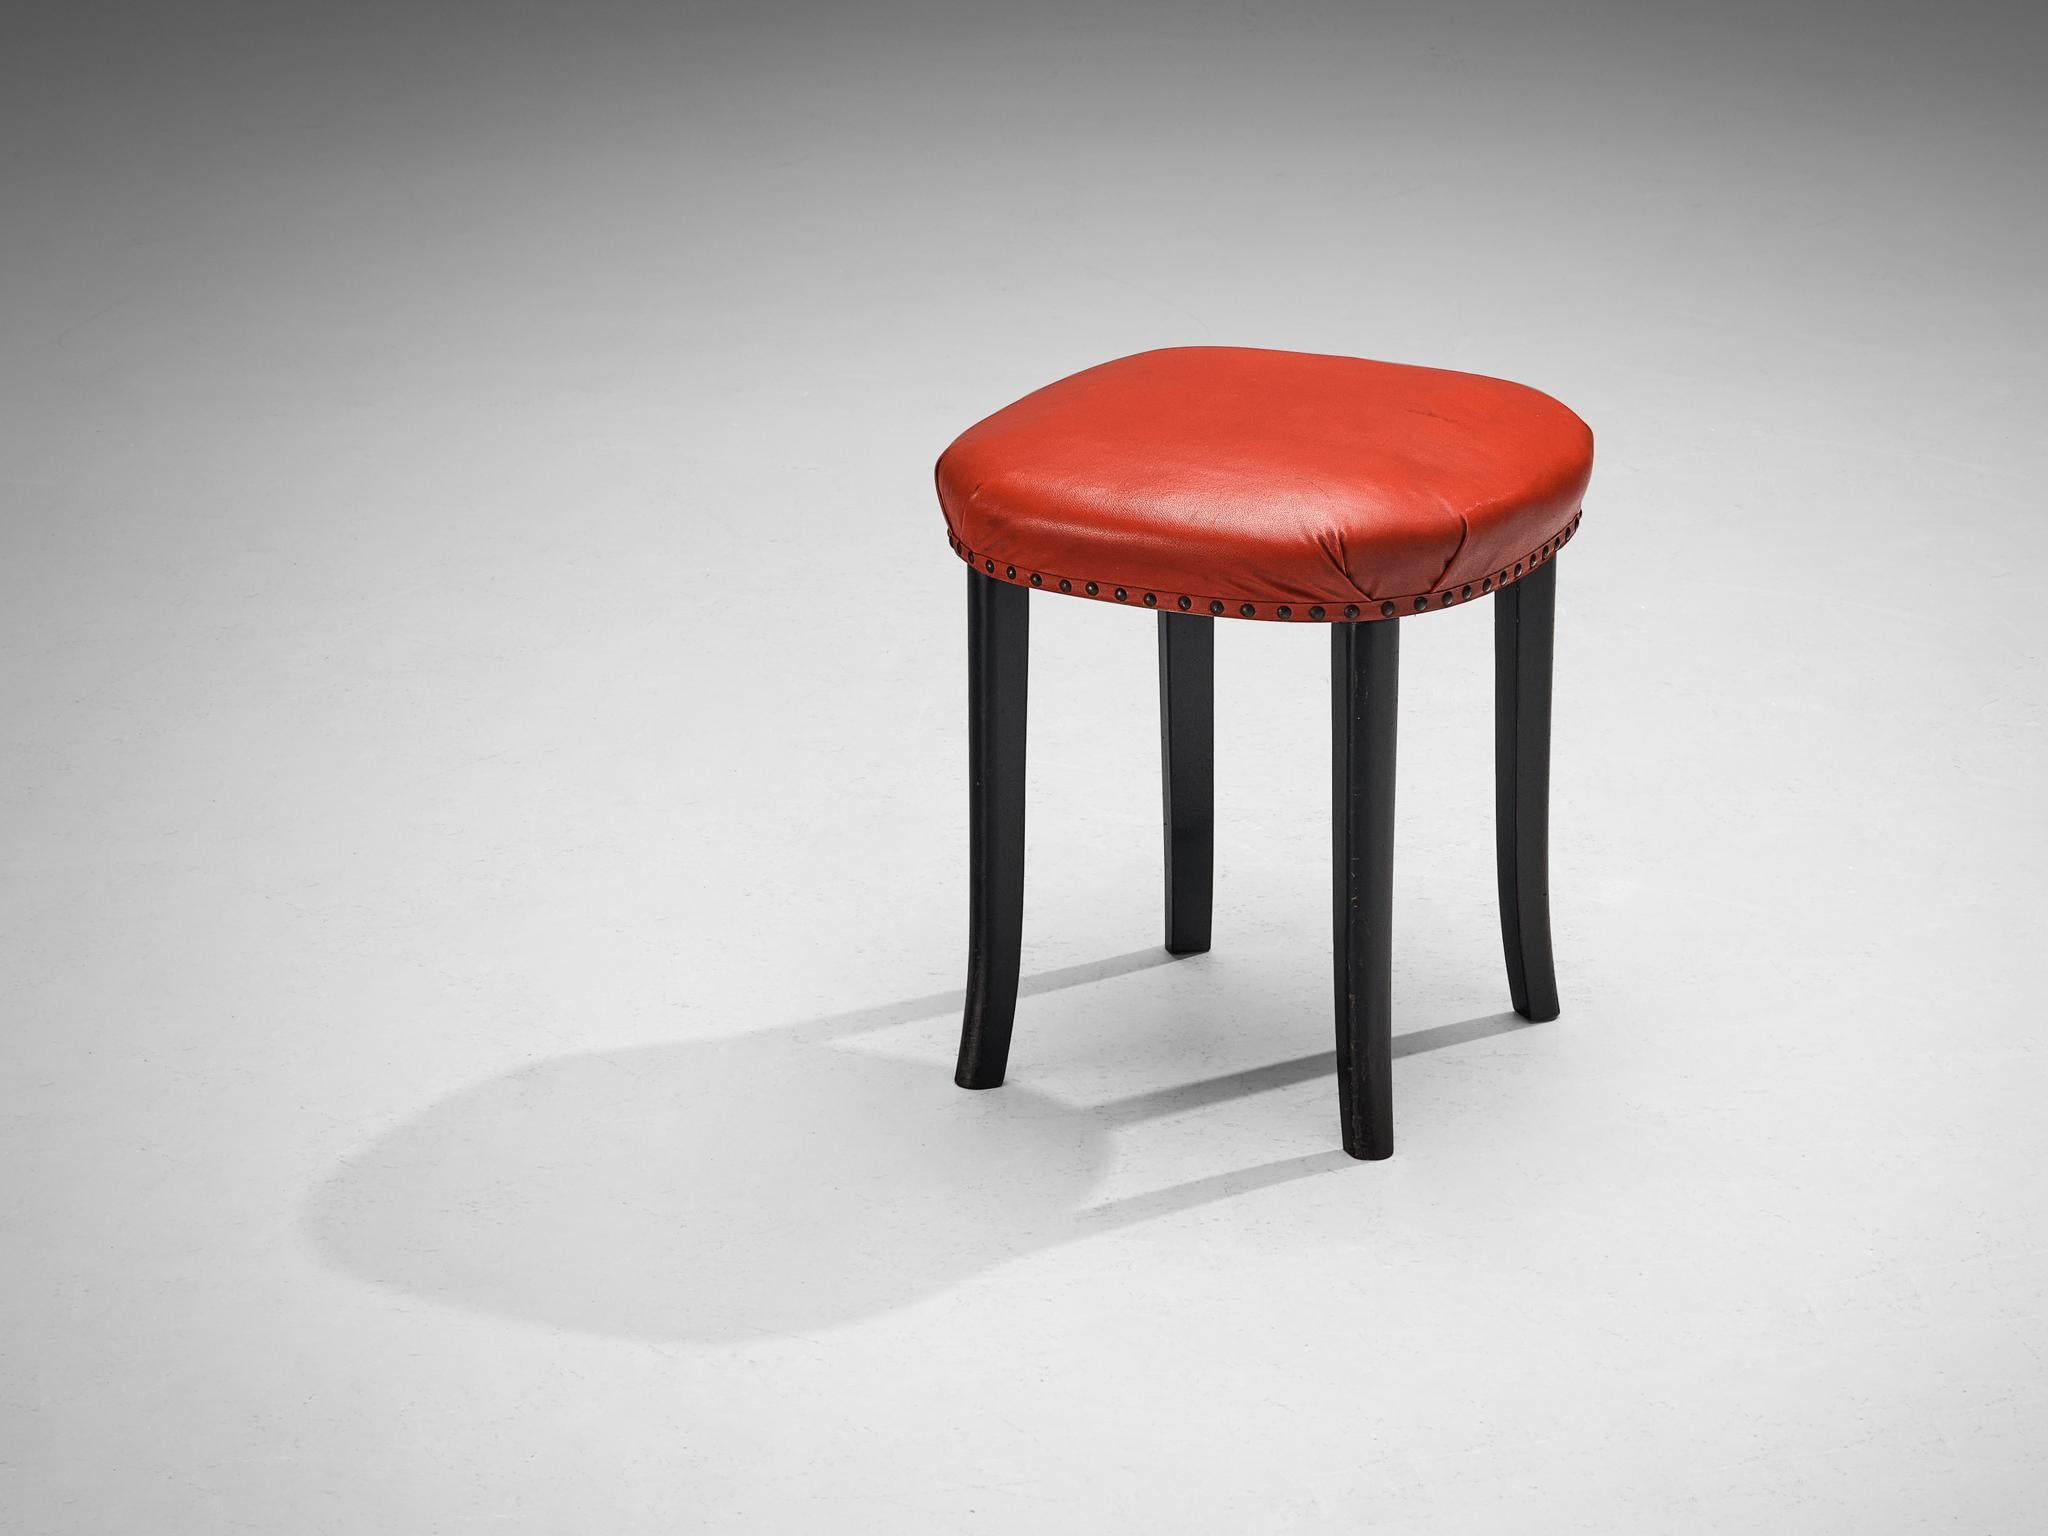 European Art Deco Stools in Red Leatherette  For Sale